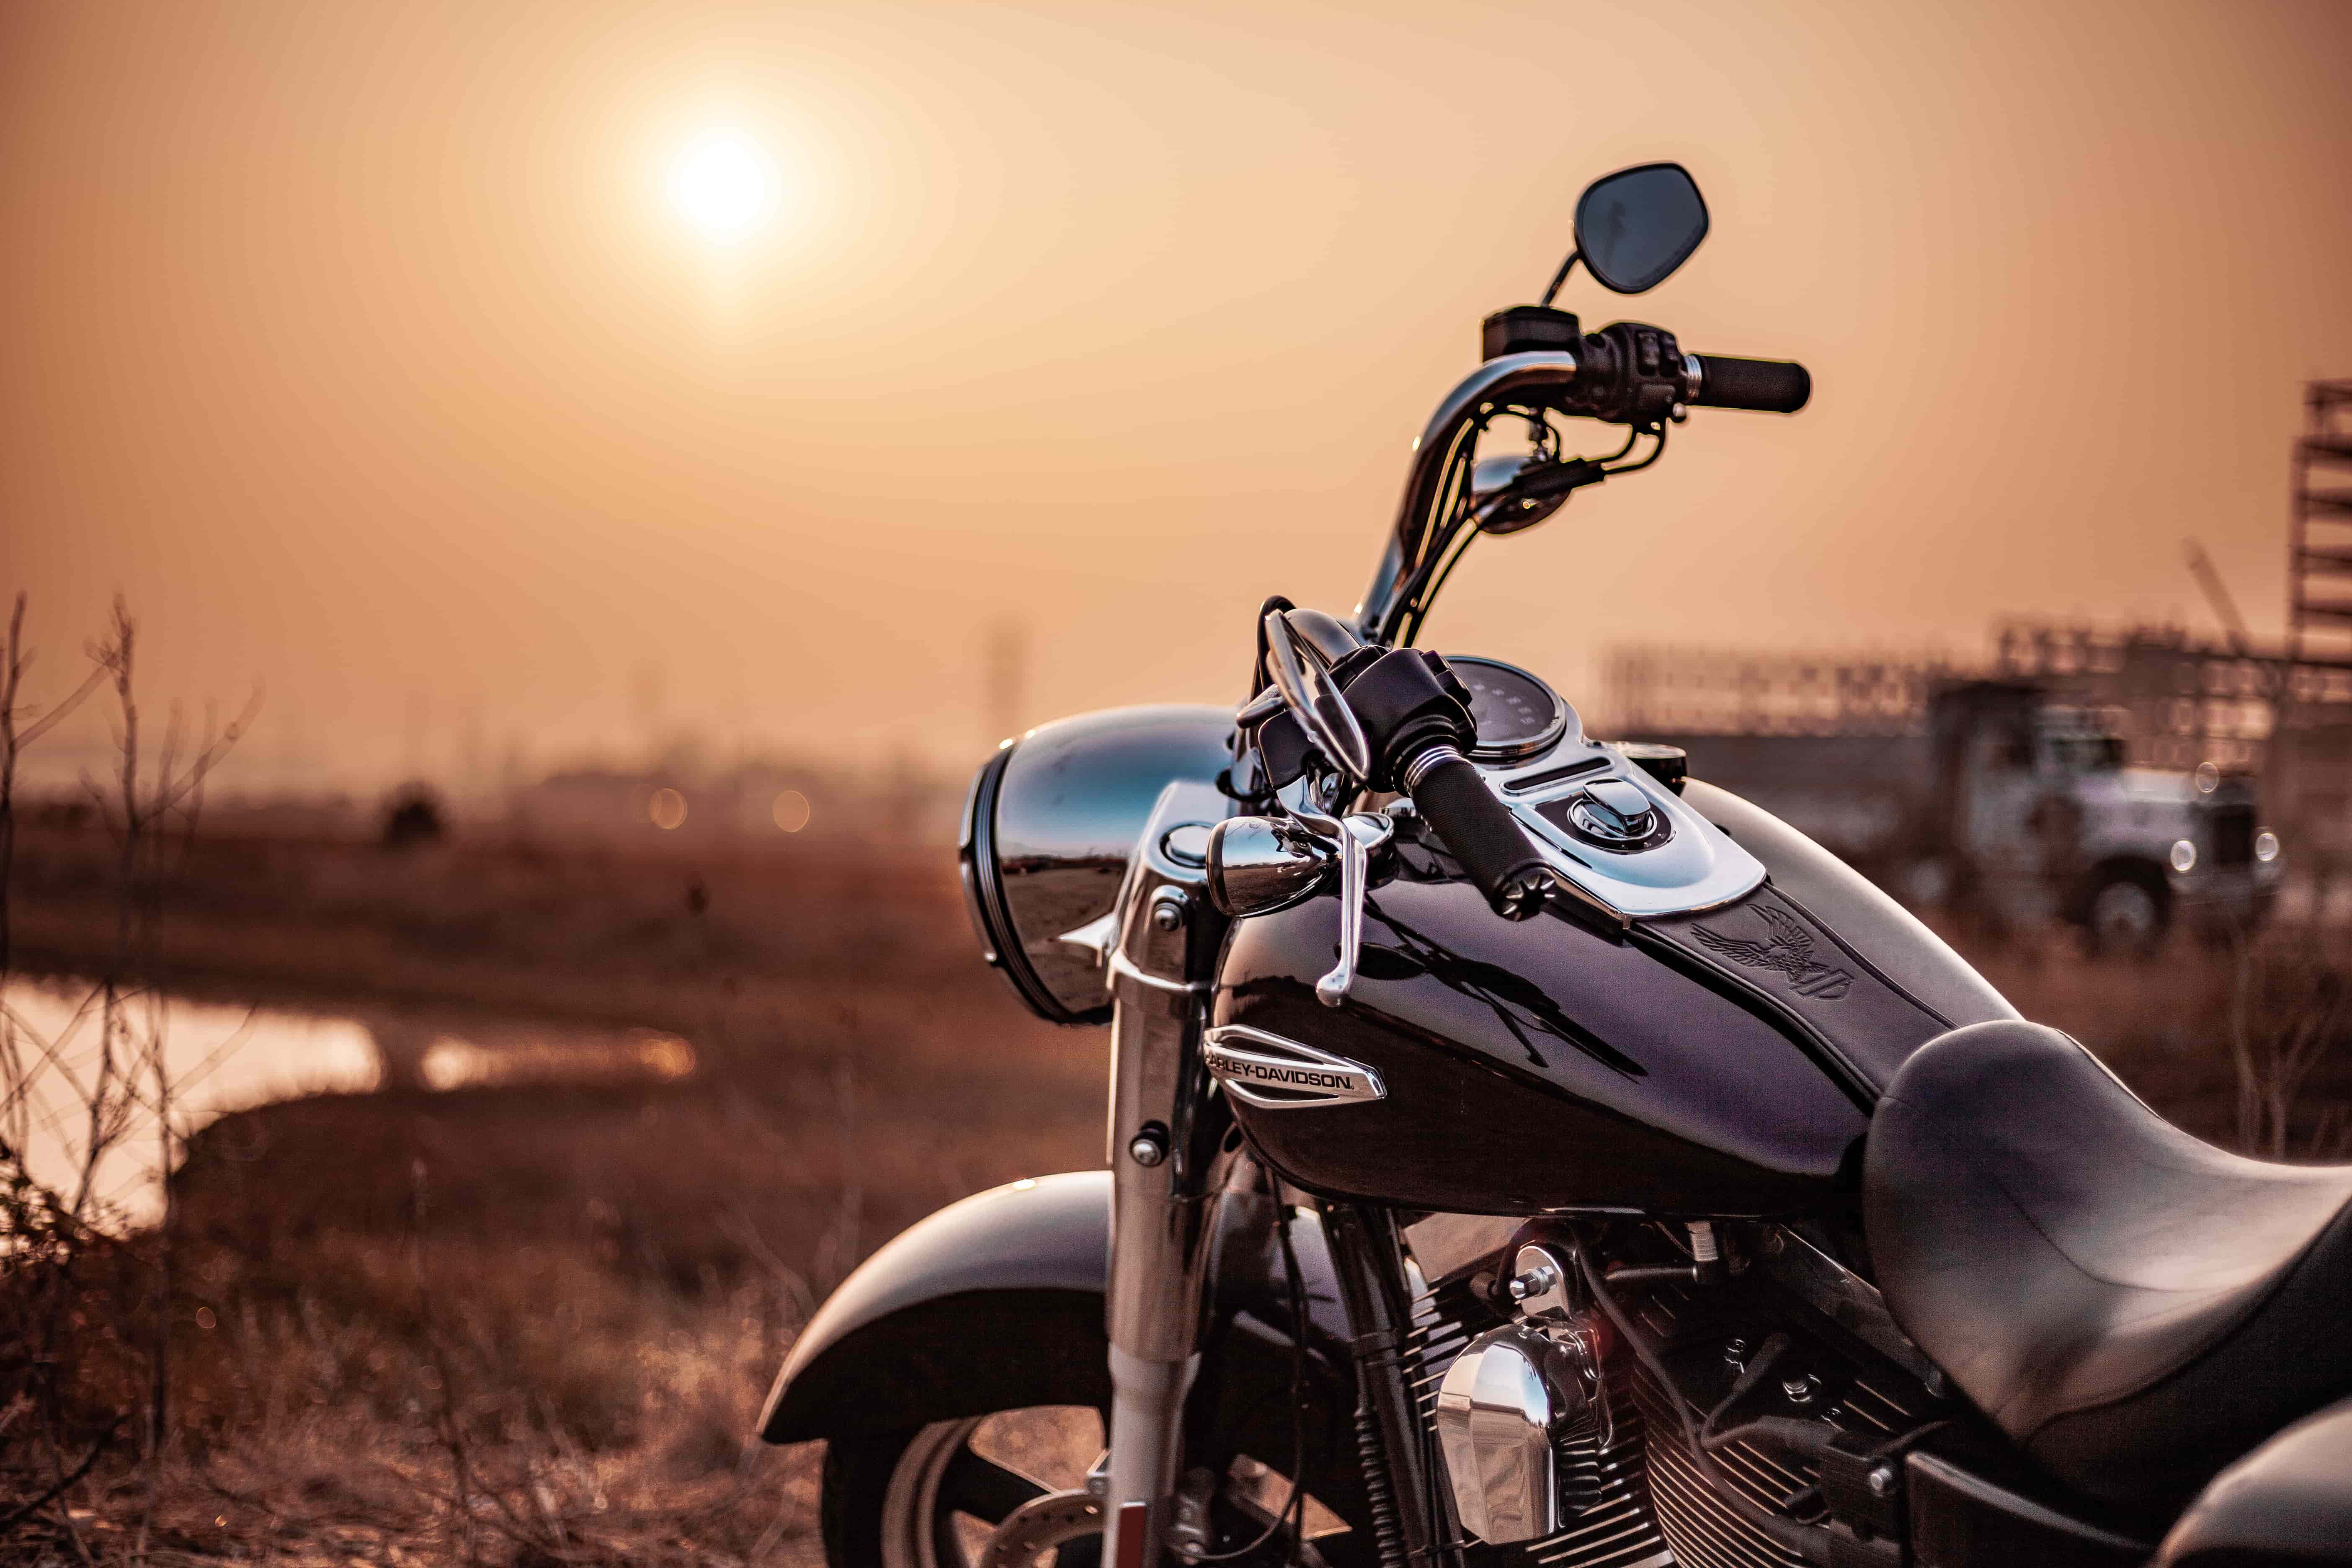 Motorcycle Theft Prevention: 4 Tips You Should Consider